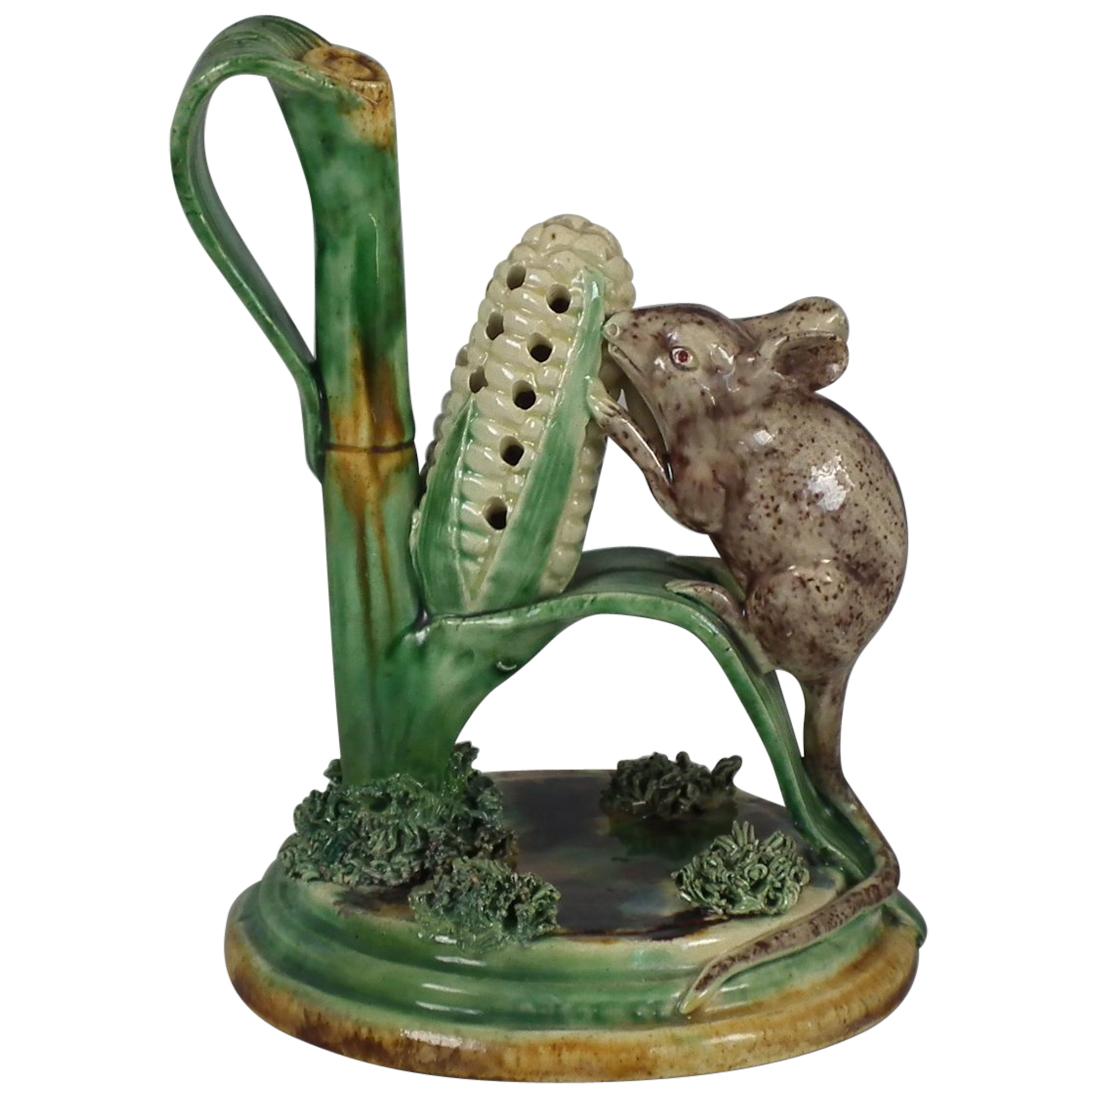 Cunha Palissy Majolica Mouse and Corn Toothpick Holder